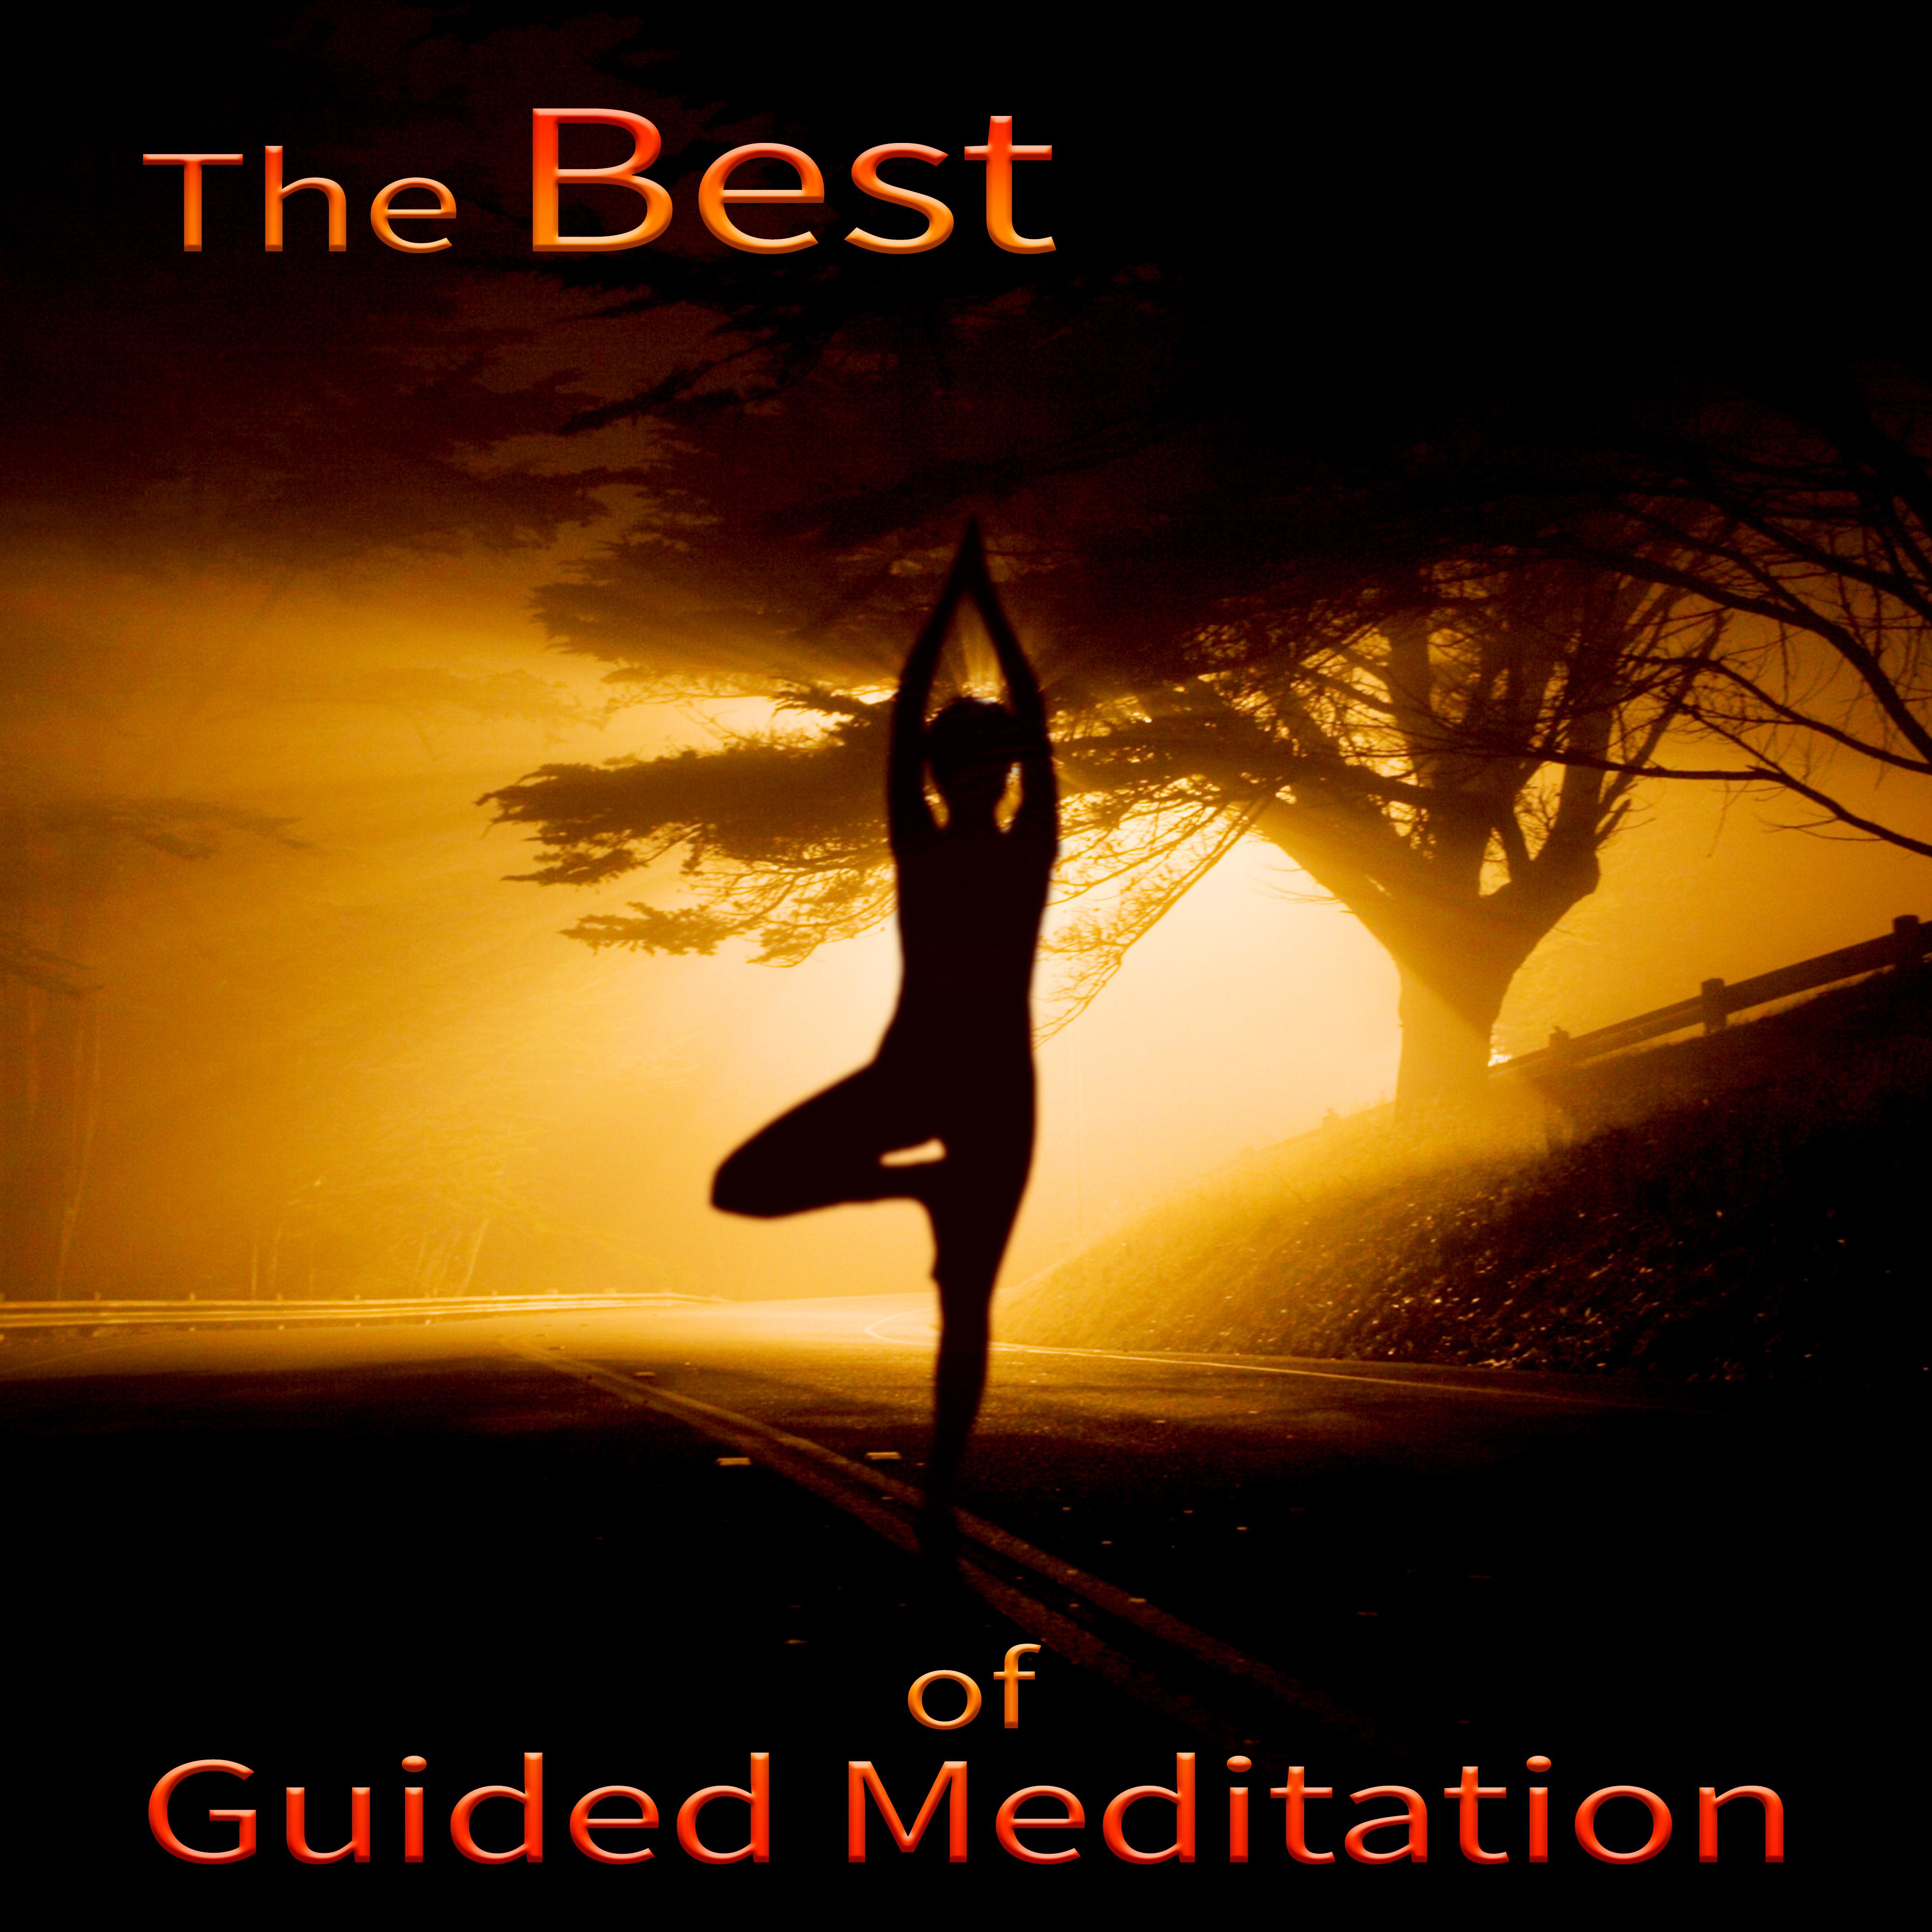 The Best of Guided Meditation - Relaxing Music for Yoga Meditation and Guided Imagery, Therapy & Healing, Chakra Balancing, Body, Mind & Soul, Inner Peace, Mindfulness